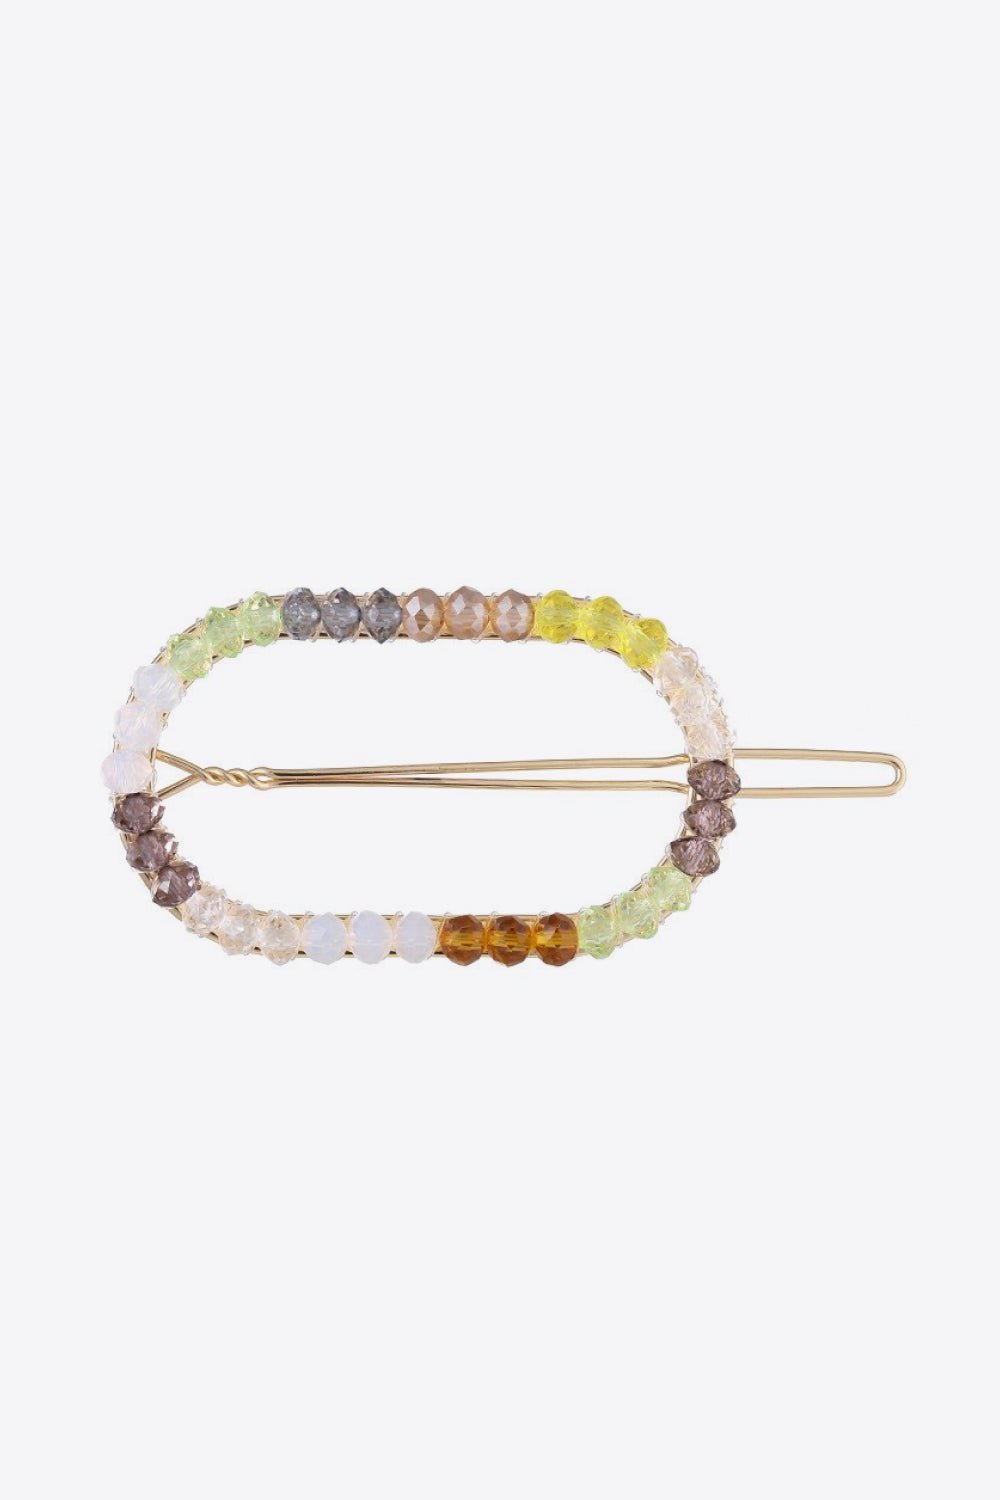 Divine Romance - Embrace Your Inner Goddess with Our Colorful Bead Hair Pin - Effortlessly Complement Any Hairstyle and Indulge in Shimmering Femininity - Guy Christopher